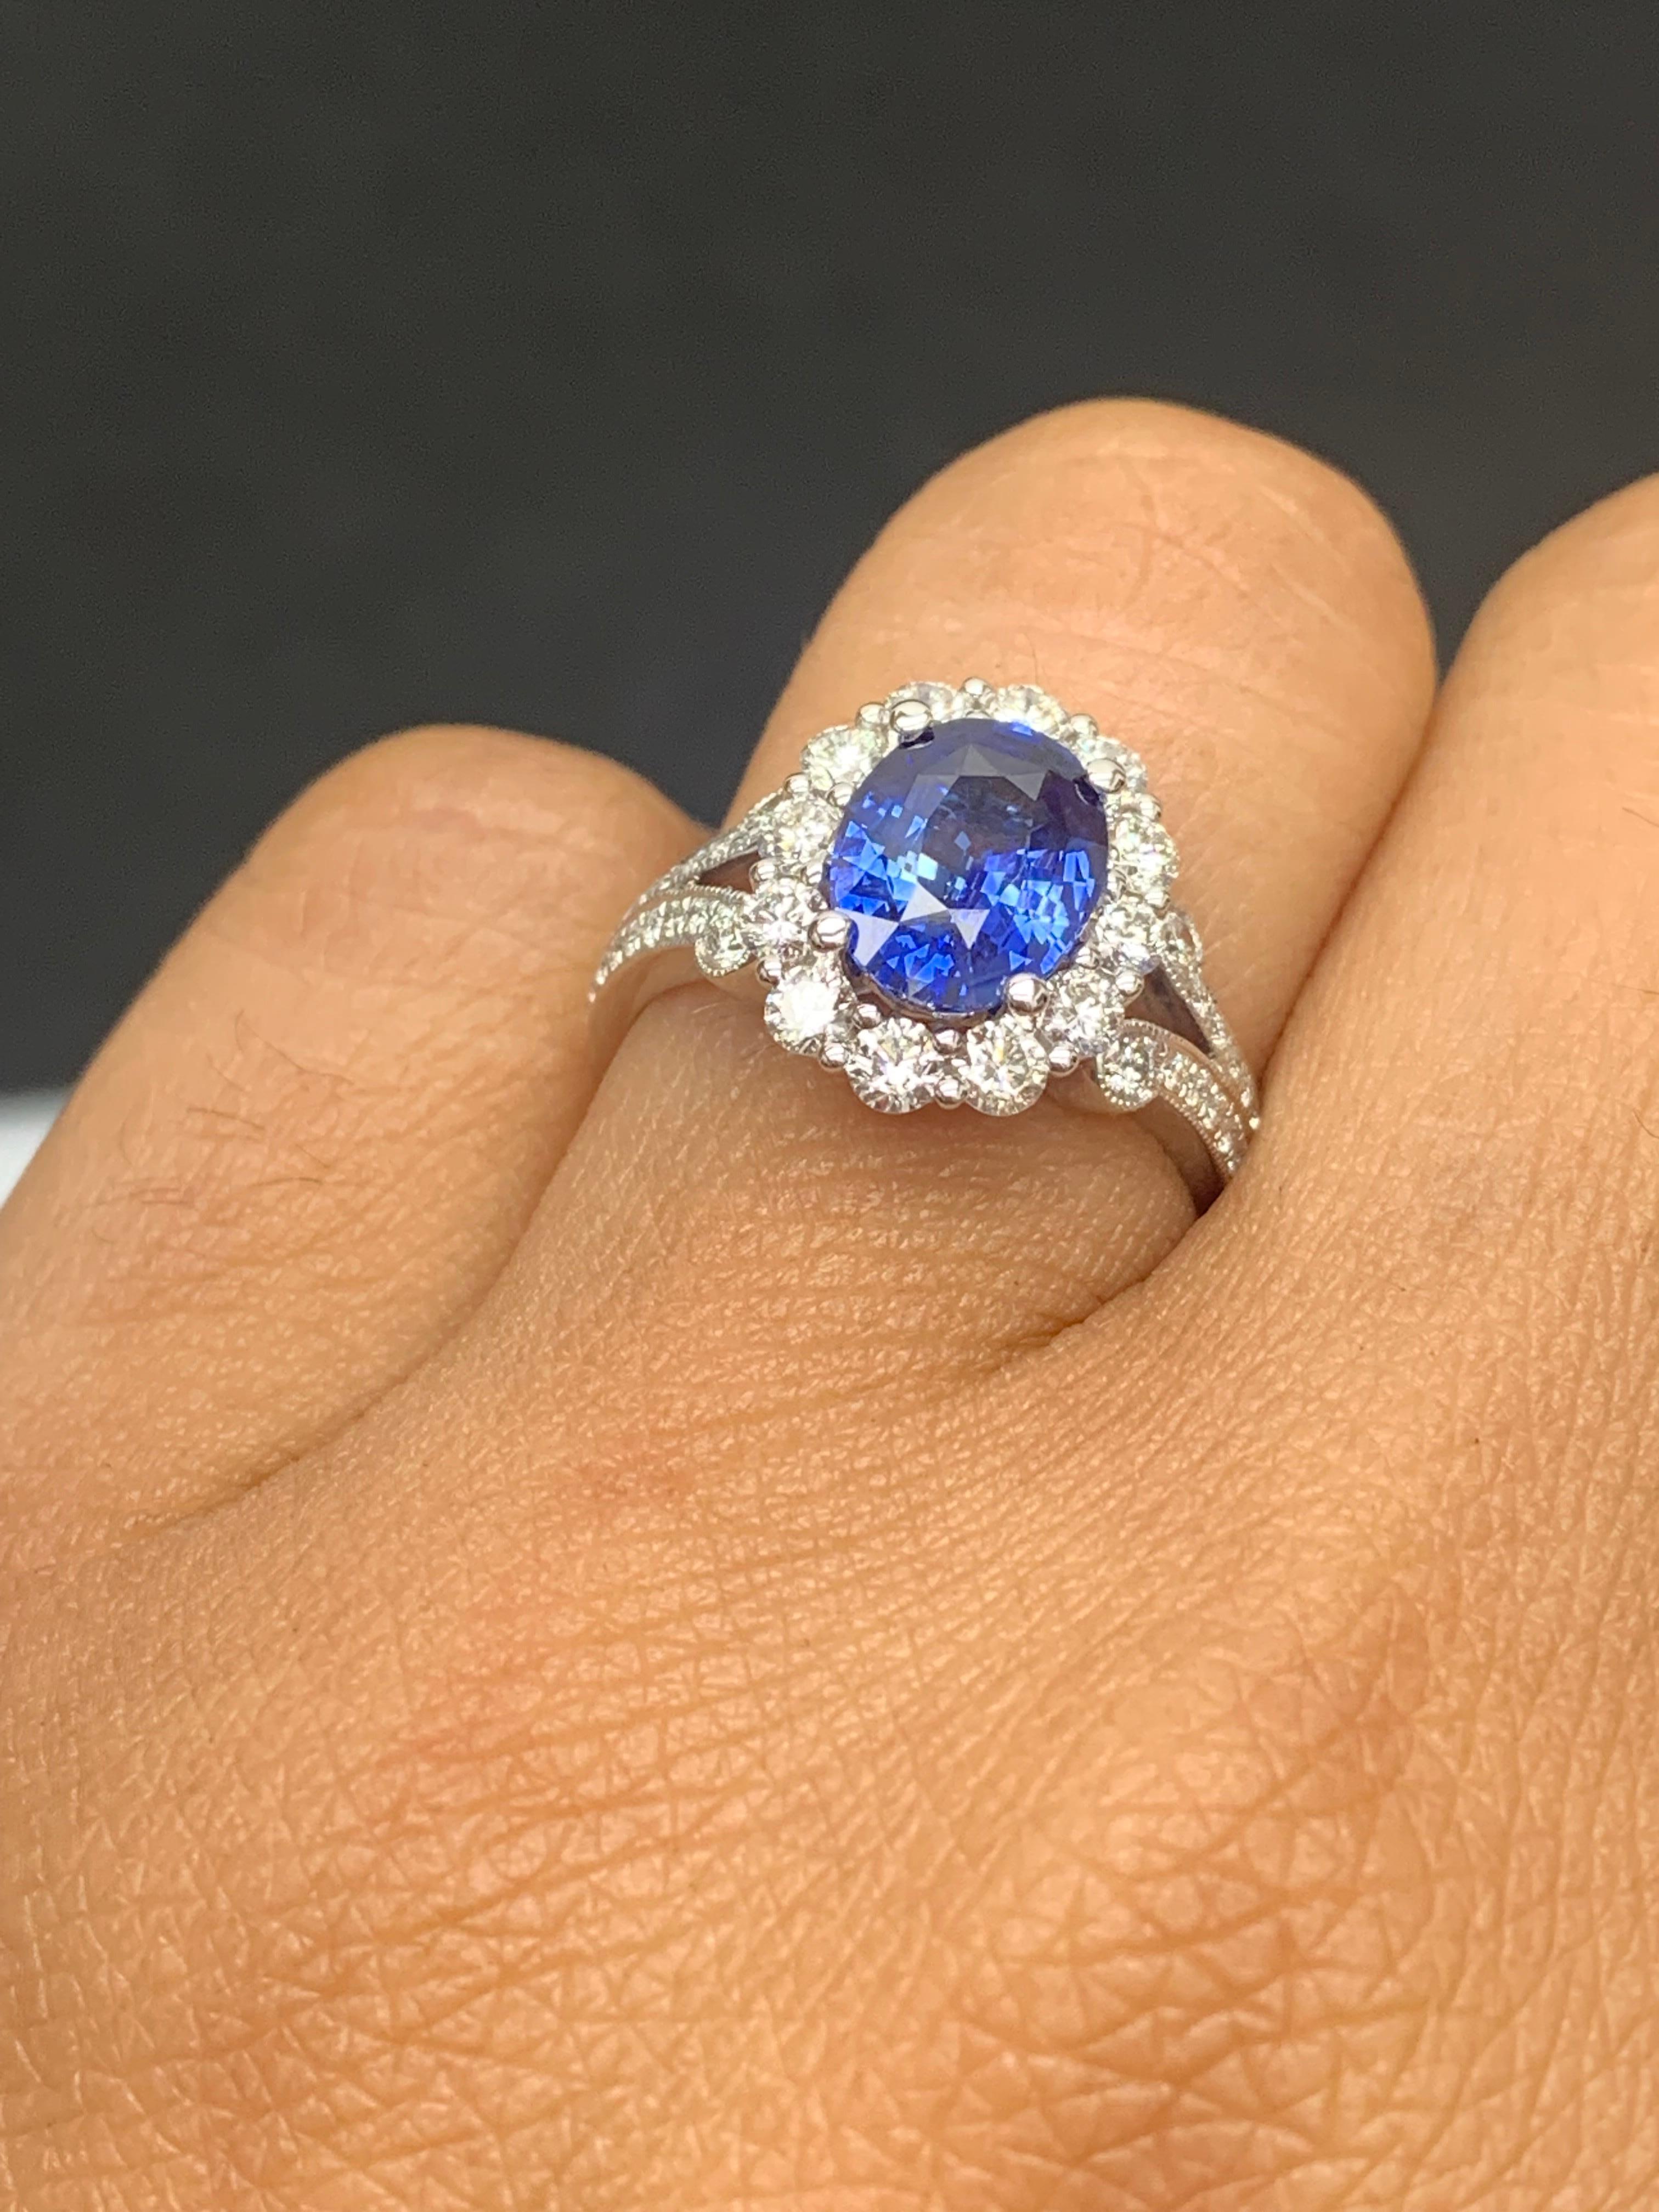 Contemporary 2.18 Carat Oval Cut Sapphire and Diamond Ring in 18k White Gold For Sale